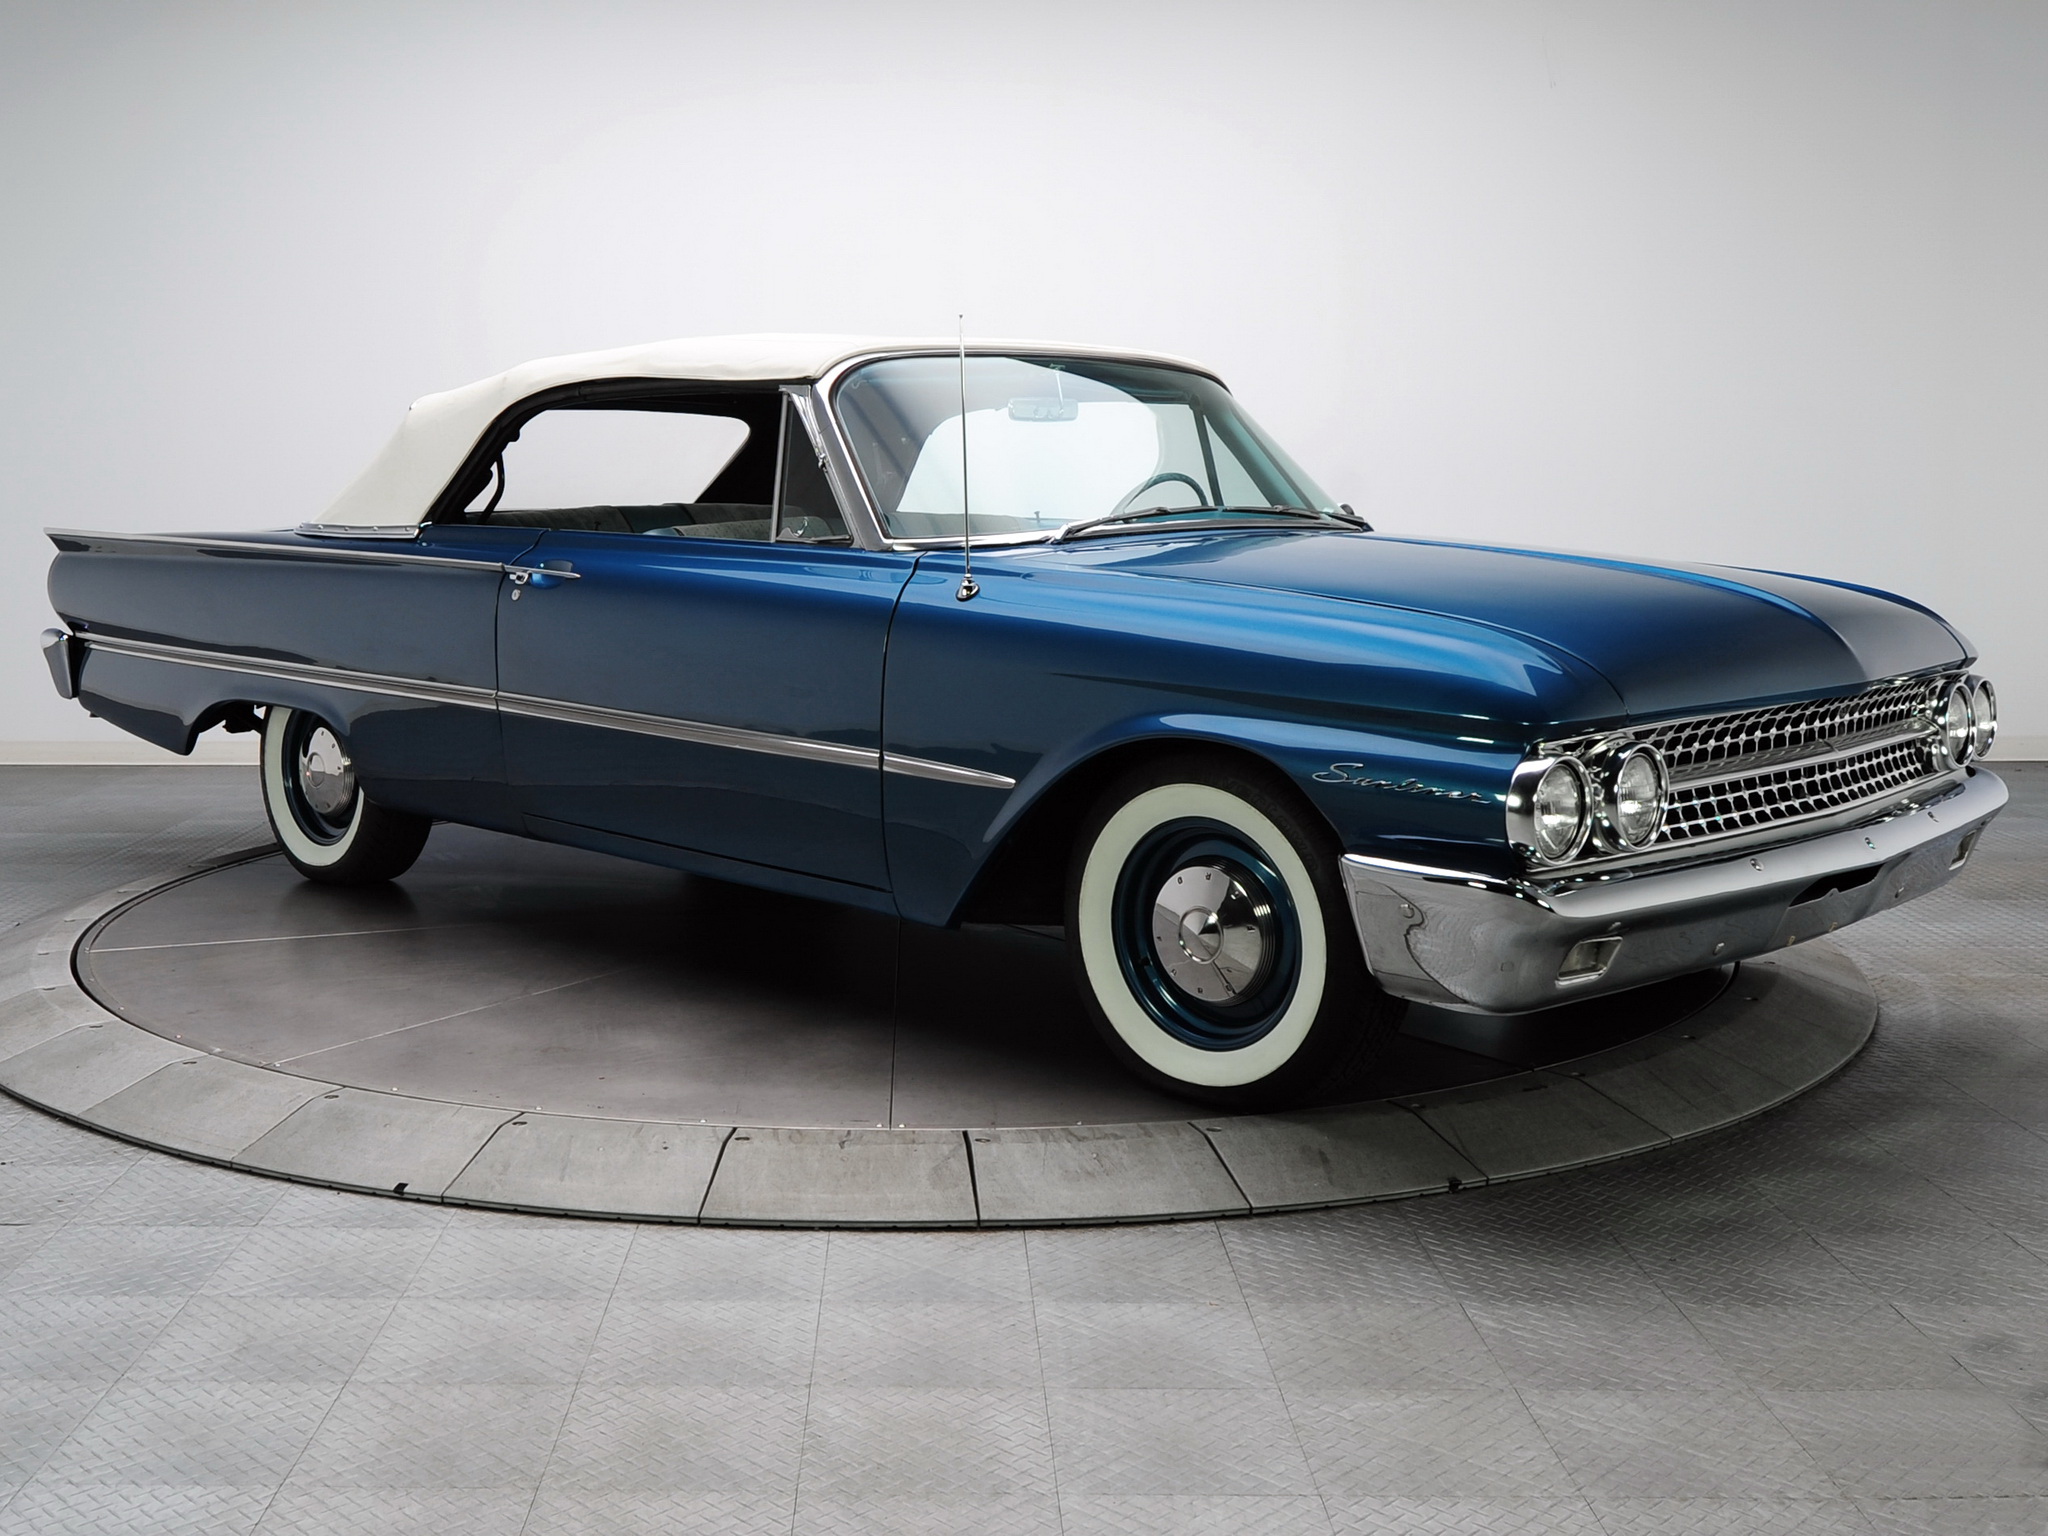 1961, Ford, Galaxie, Sunliner, 390, Classic, Convertible, Gs Wallpaper